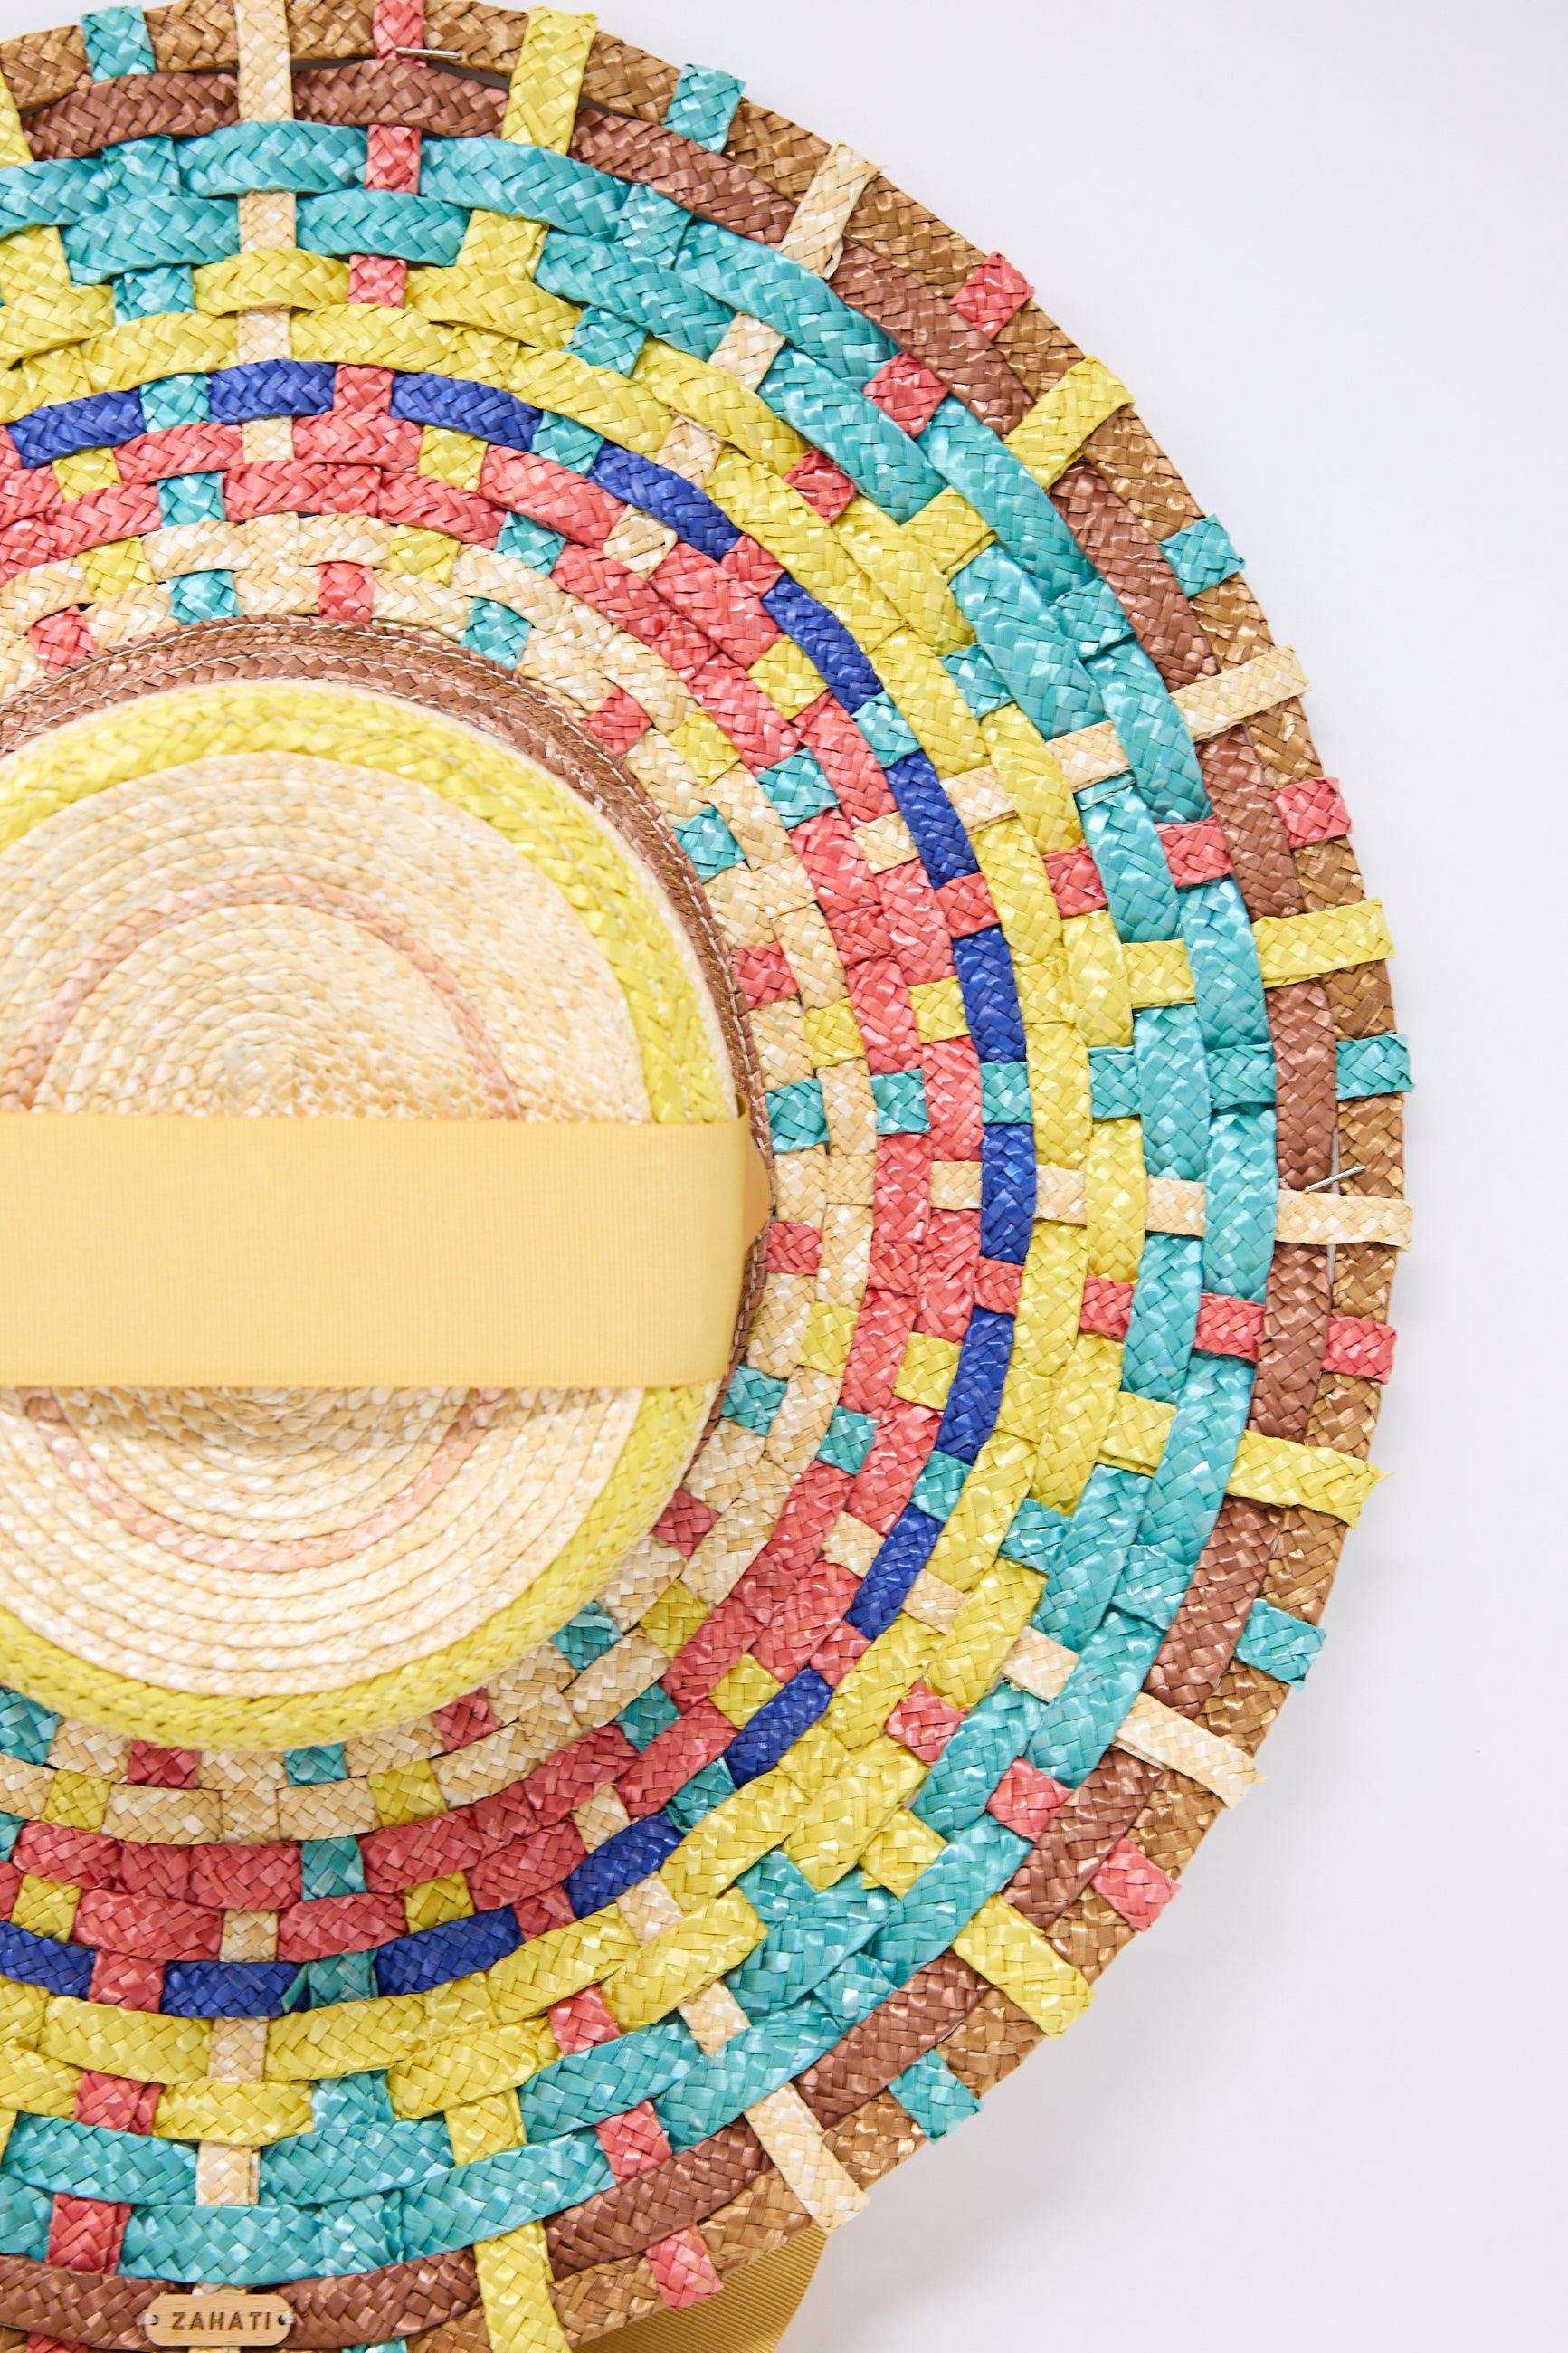 Close-up of a colorful handmade Straw Cuchi Tris-Tras No. 94 Hat with Laces with concentric patterns in yellow, blue, red, and green, featuring a yellow headband. The wide brim is crafted from braided straw. The brand name "Zahati" is visible on the bottom edge of the hat.